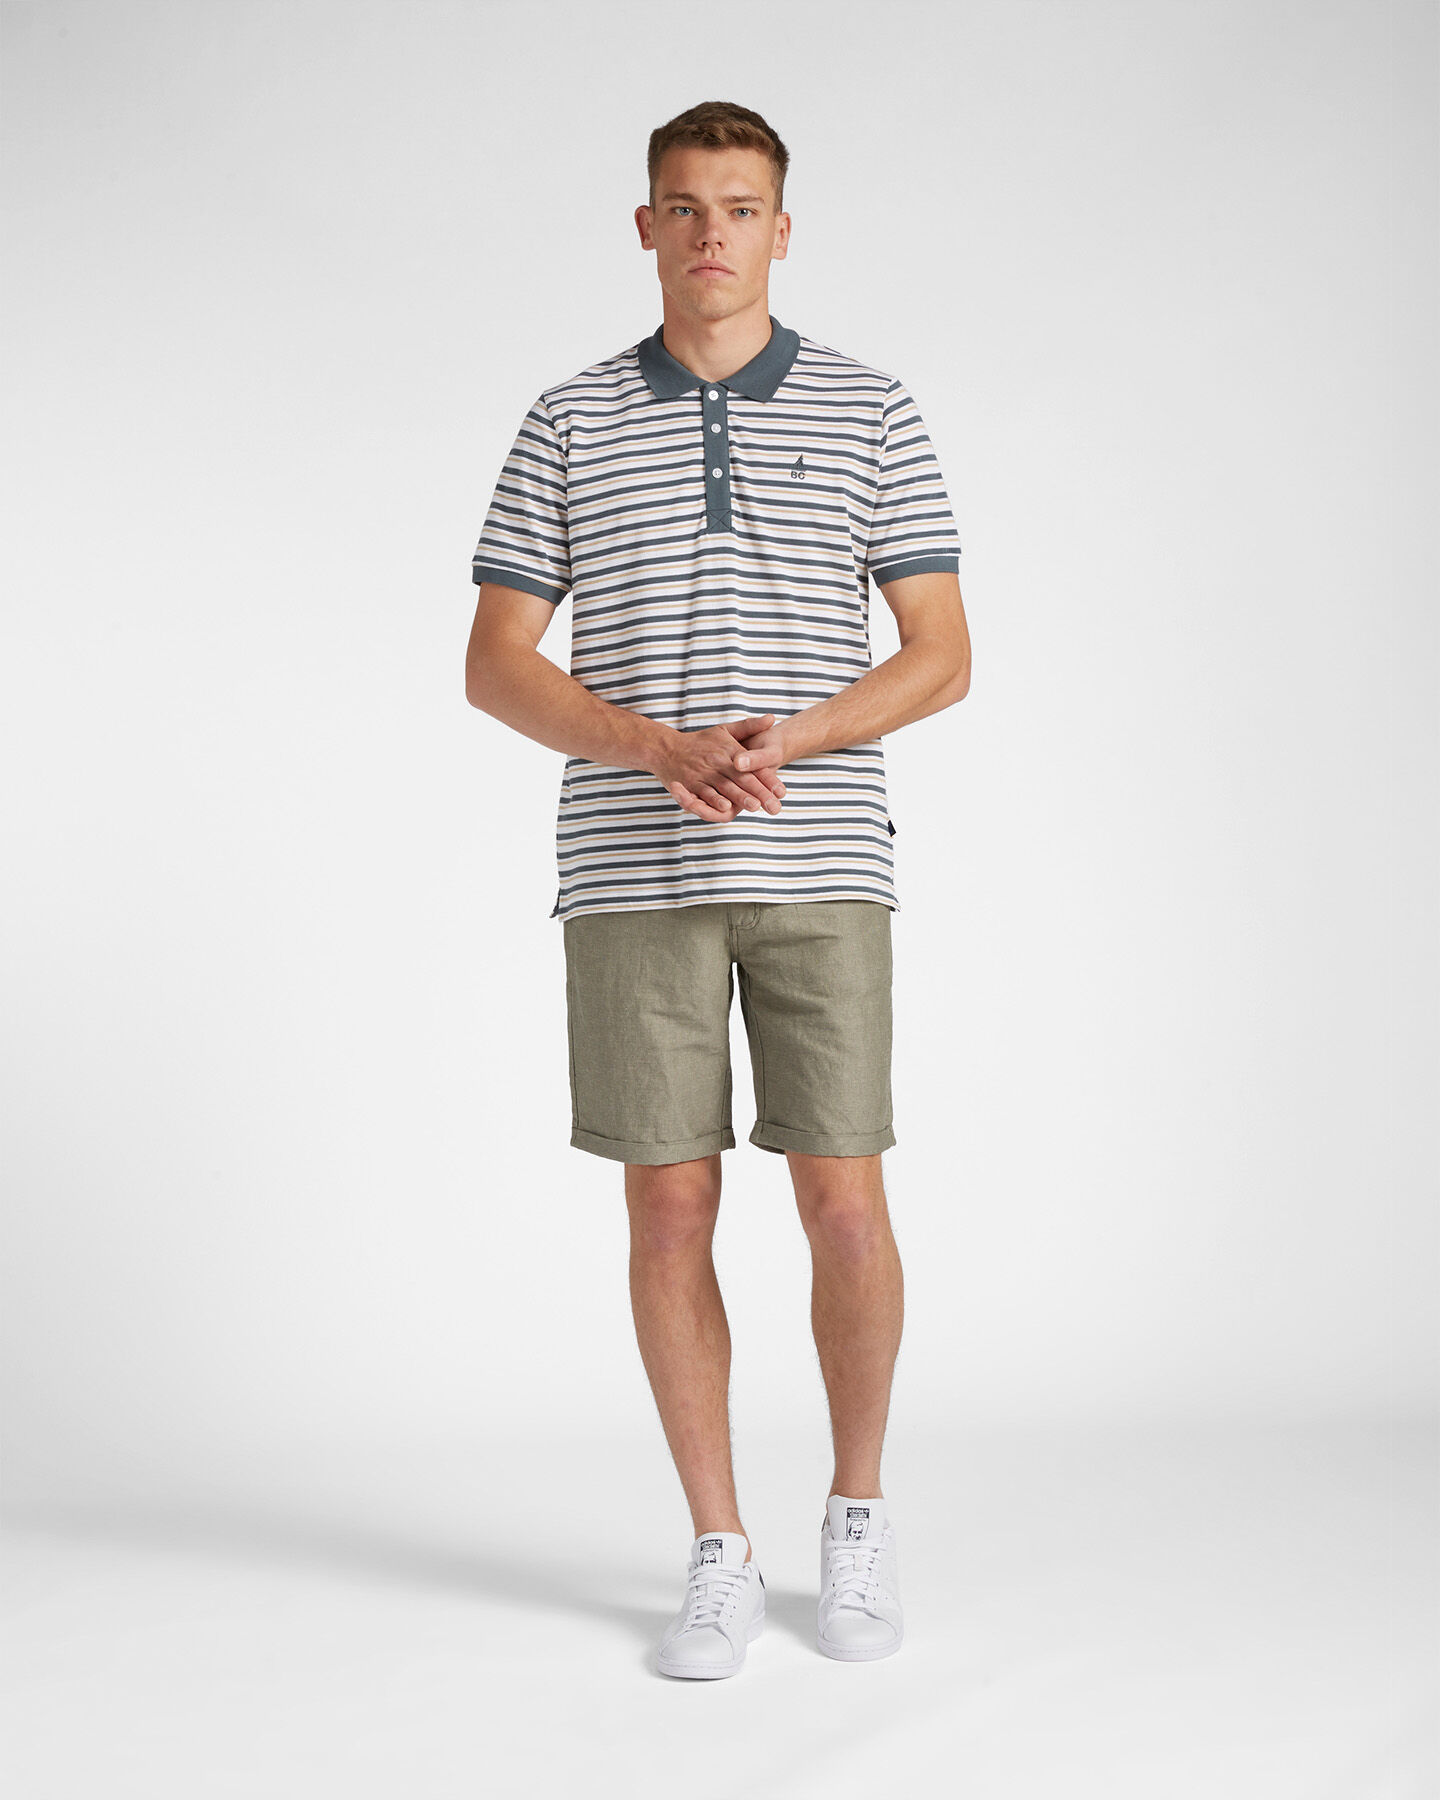  Polo BEST COMPANY HERITAGE M S4122349|790A|XXL scatto 1